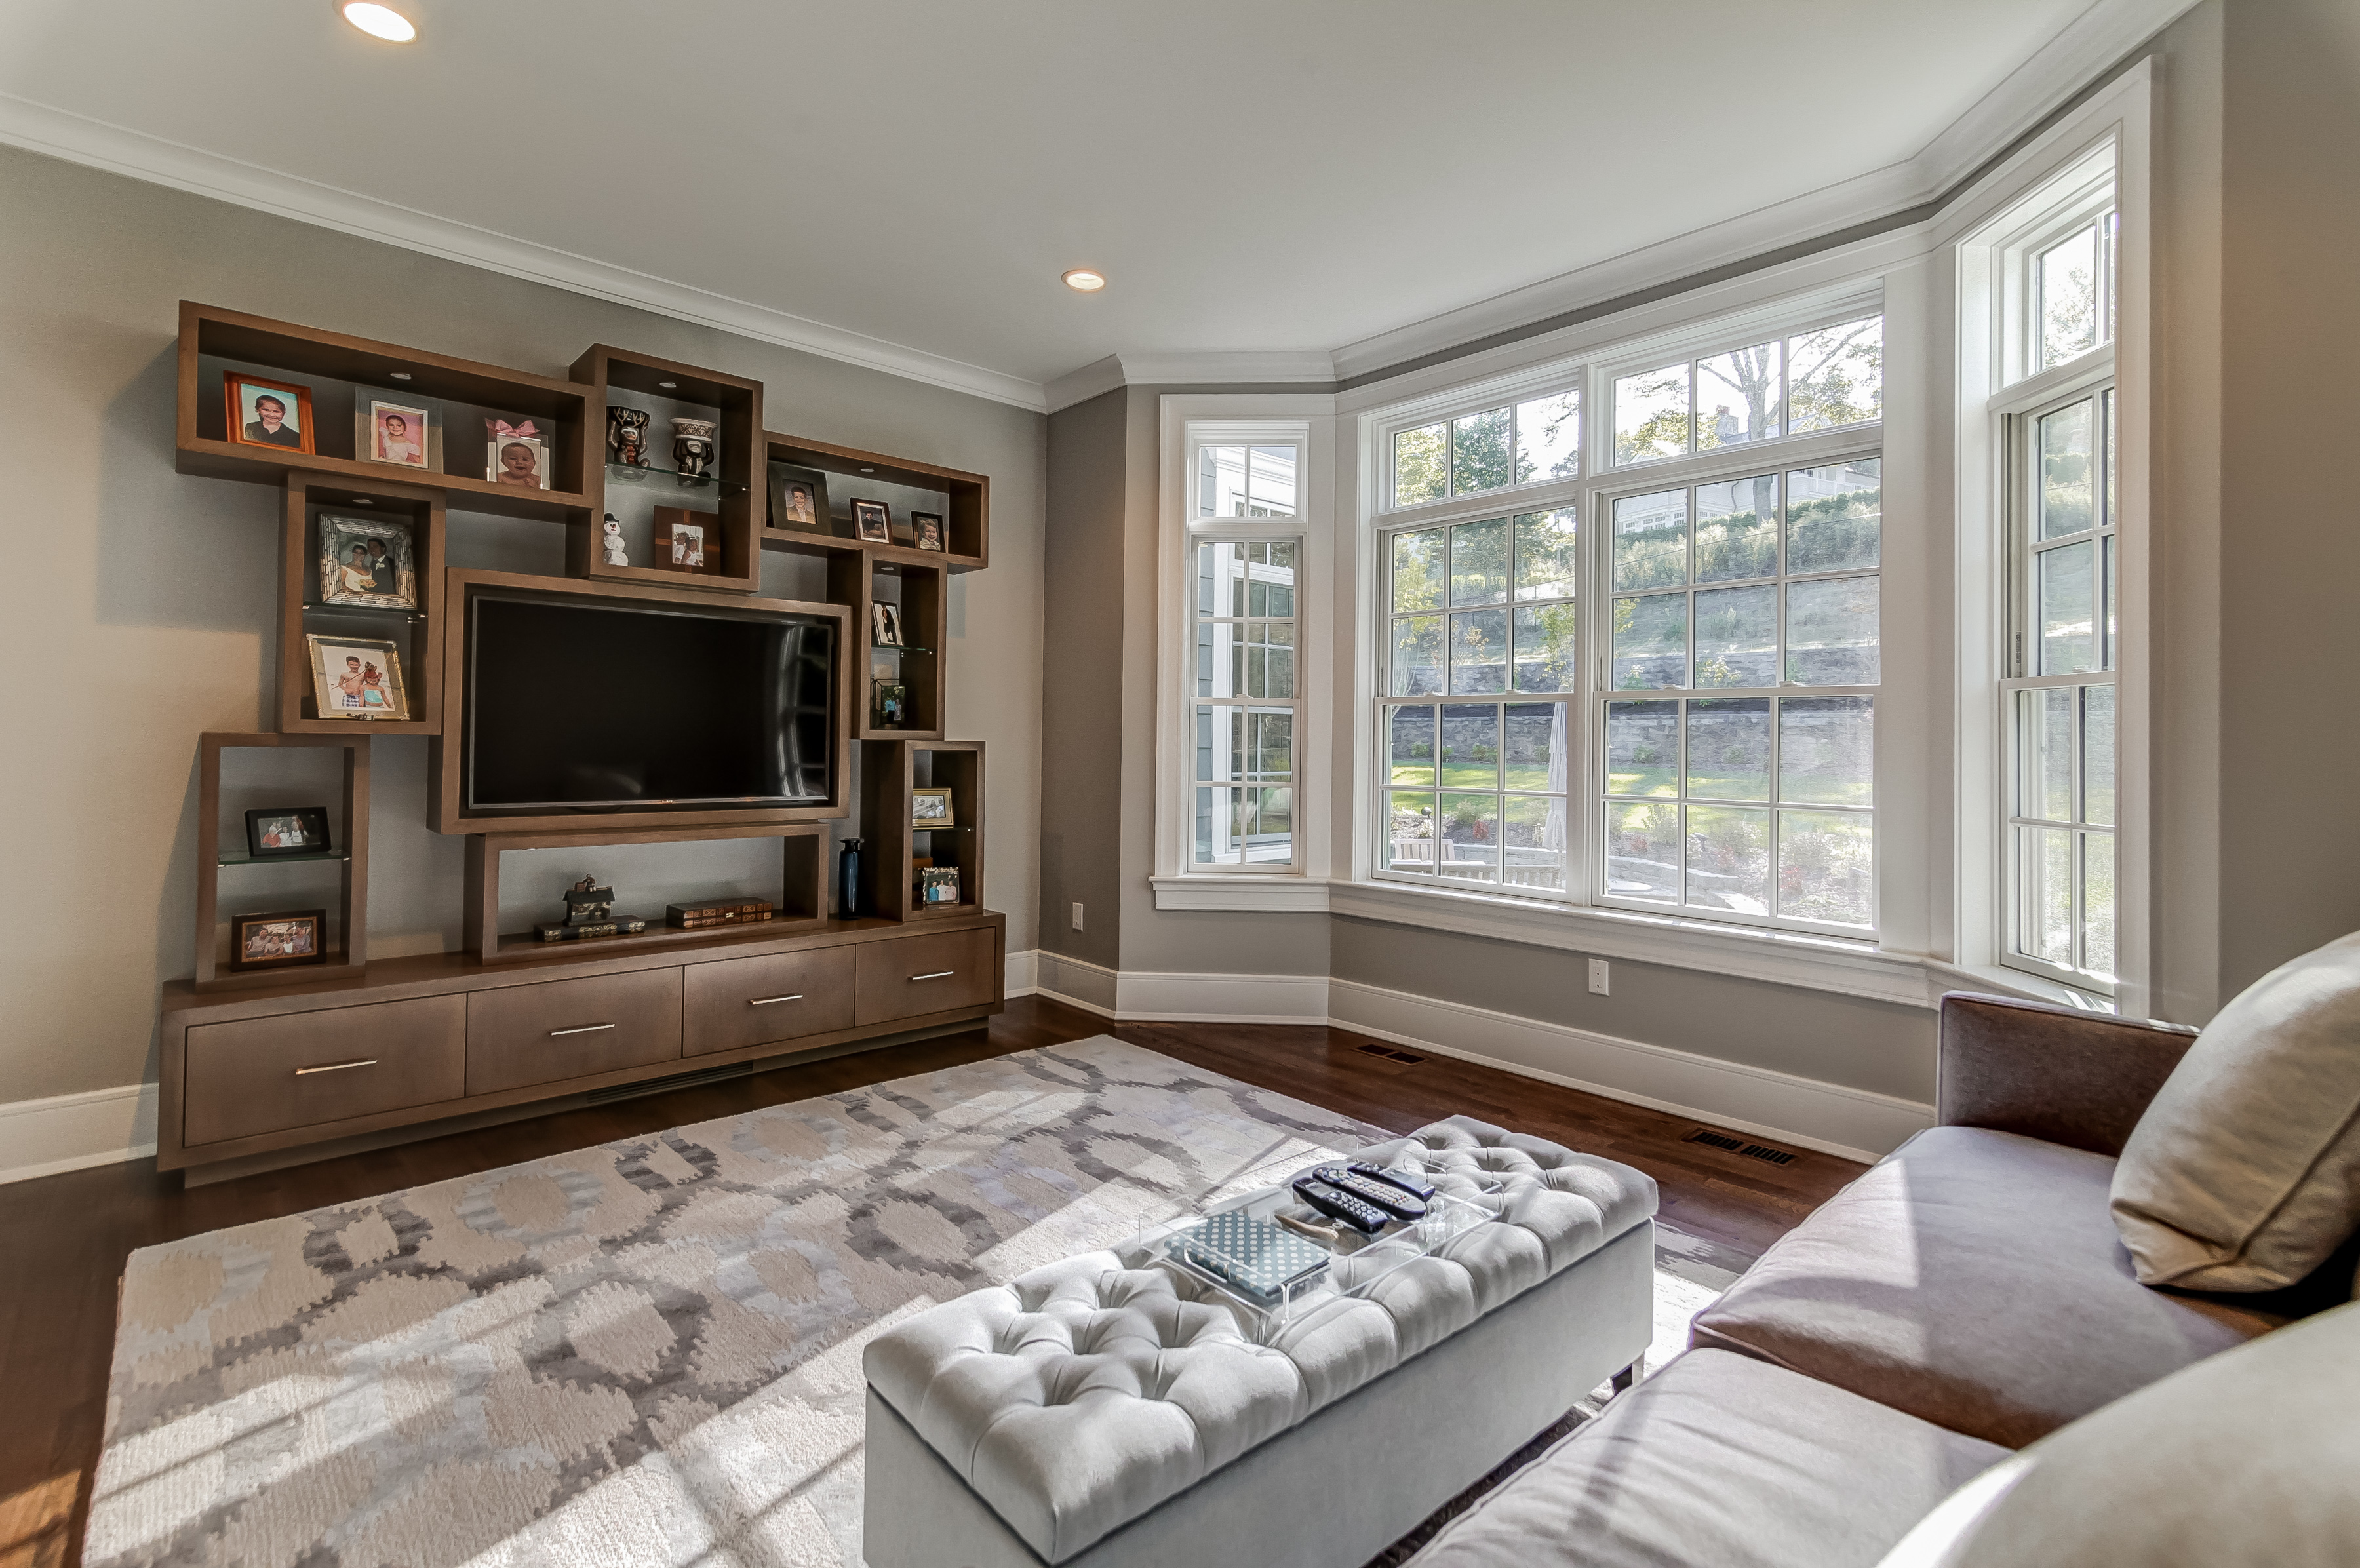 13 – Gorgeous Den – Potential In-law Suite – 20 Troy Drive, Example of Most Recent Project form Builder